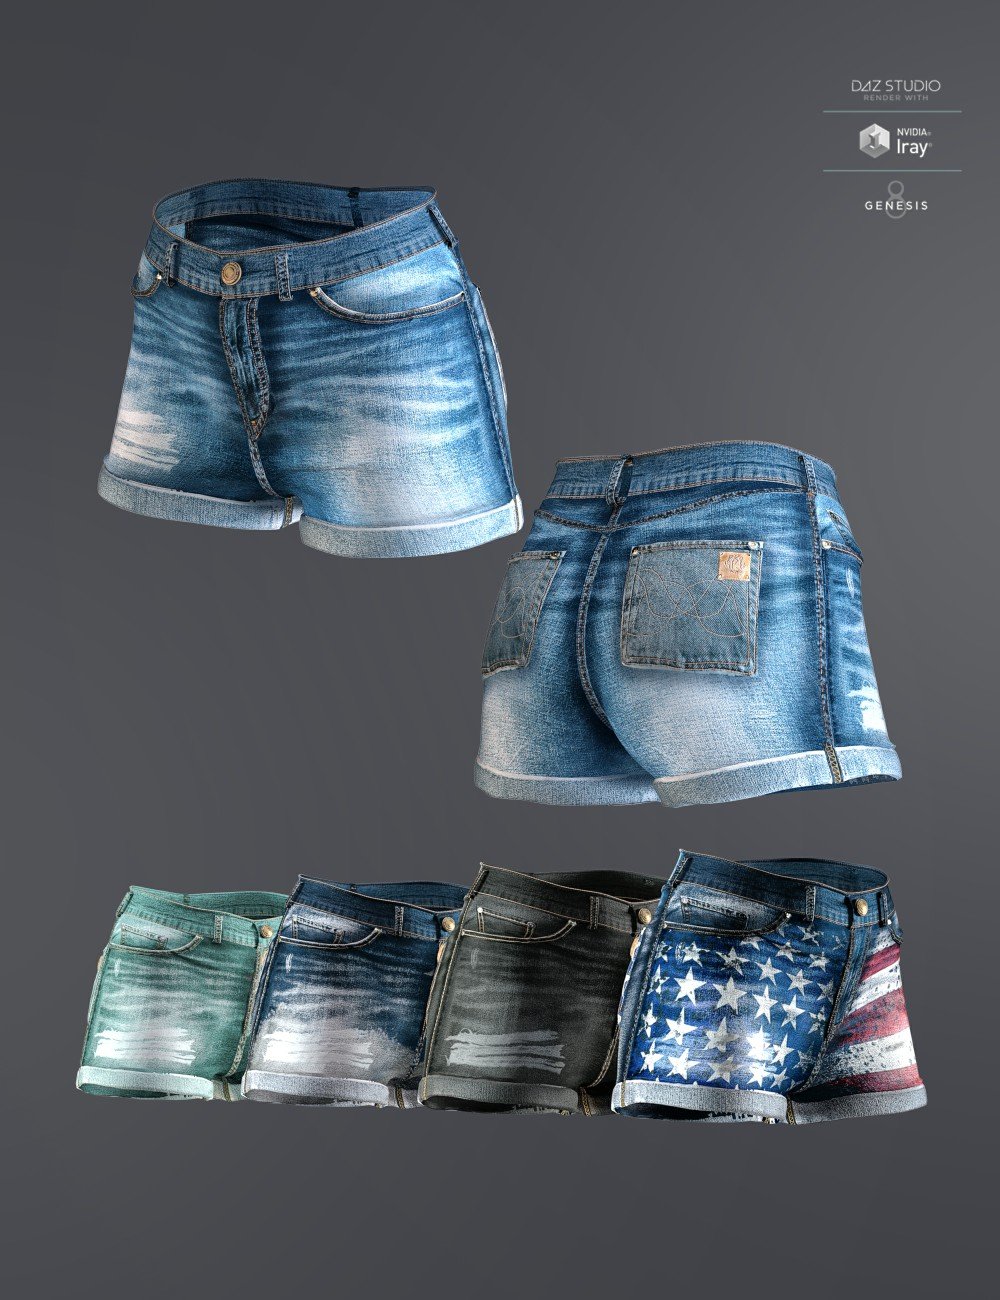 AJC Pro Skate Shorts for Genesis 8 and 8.1 Females by: adeilsonjc, 3D Models by Daz 3D